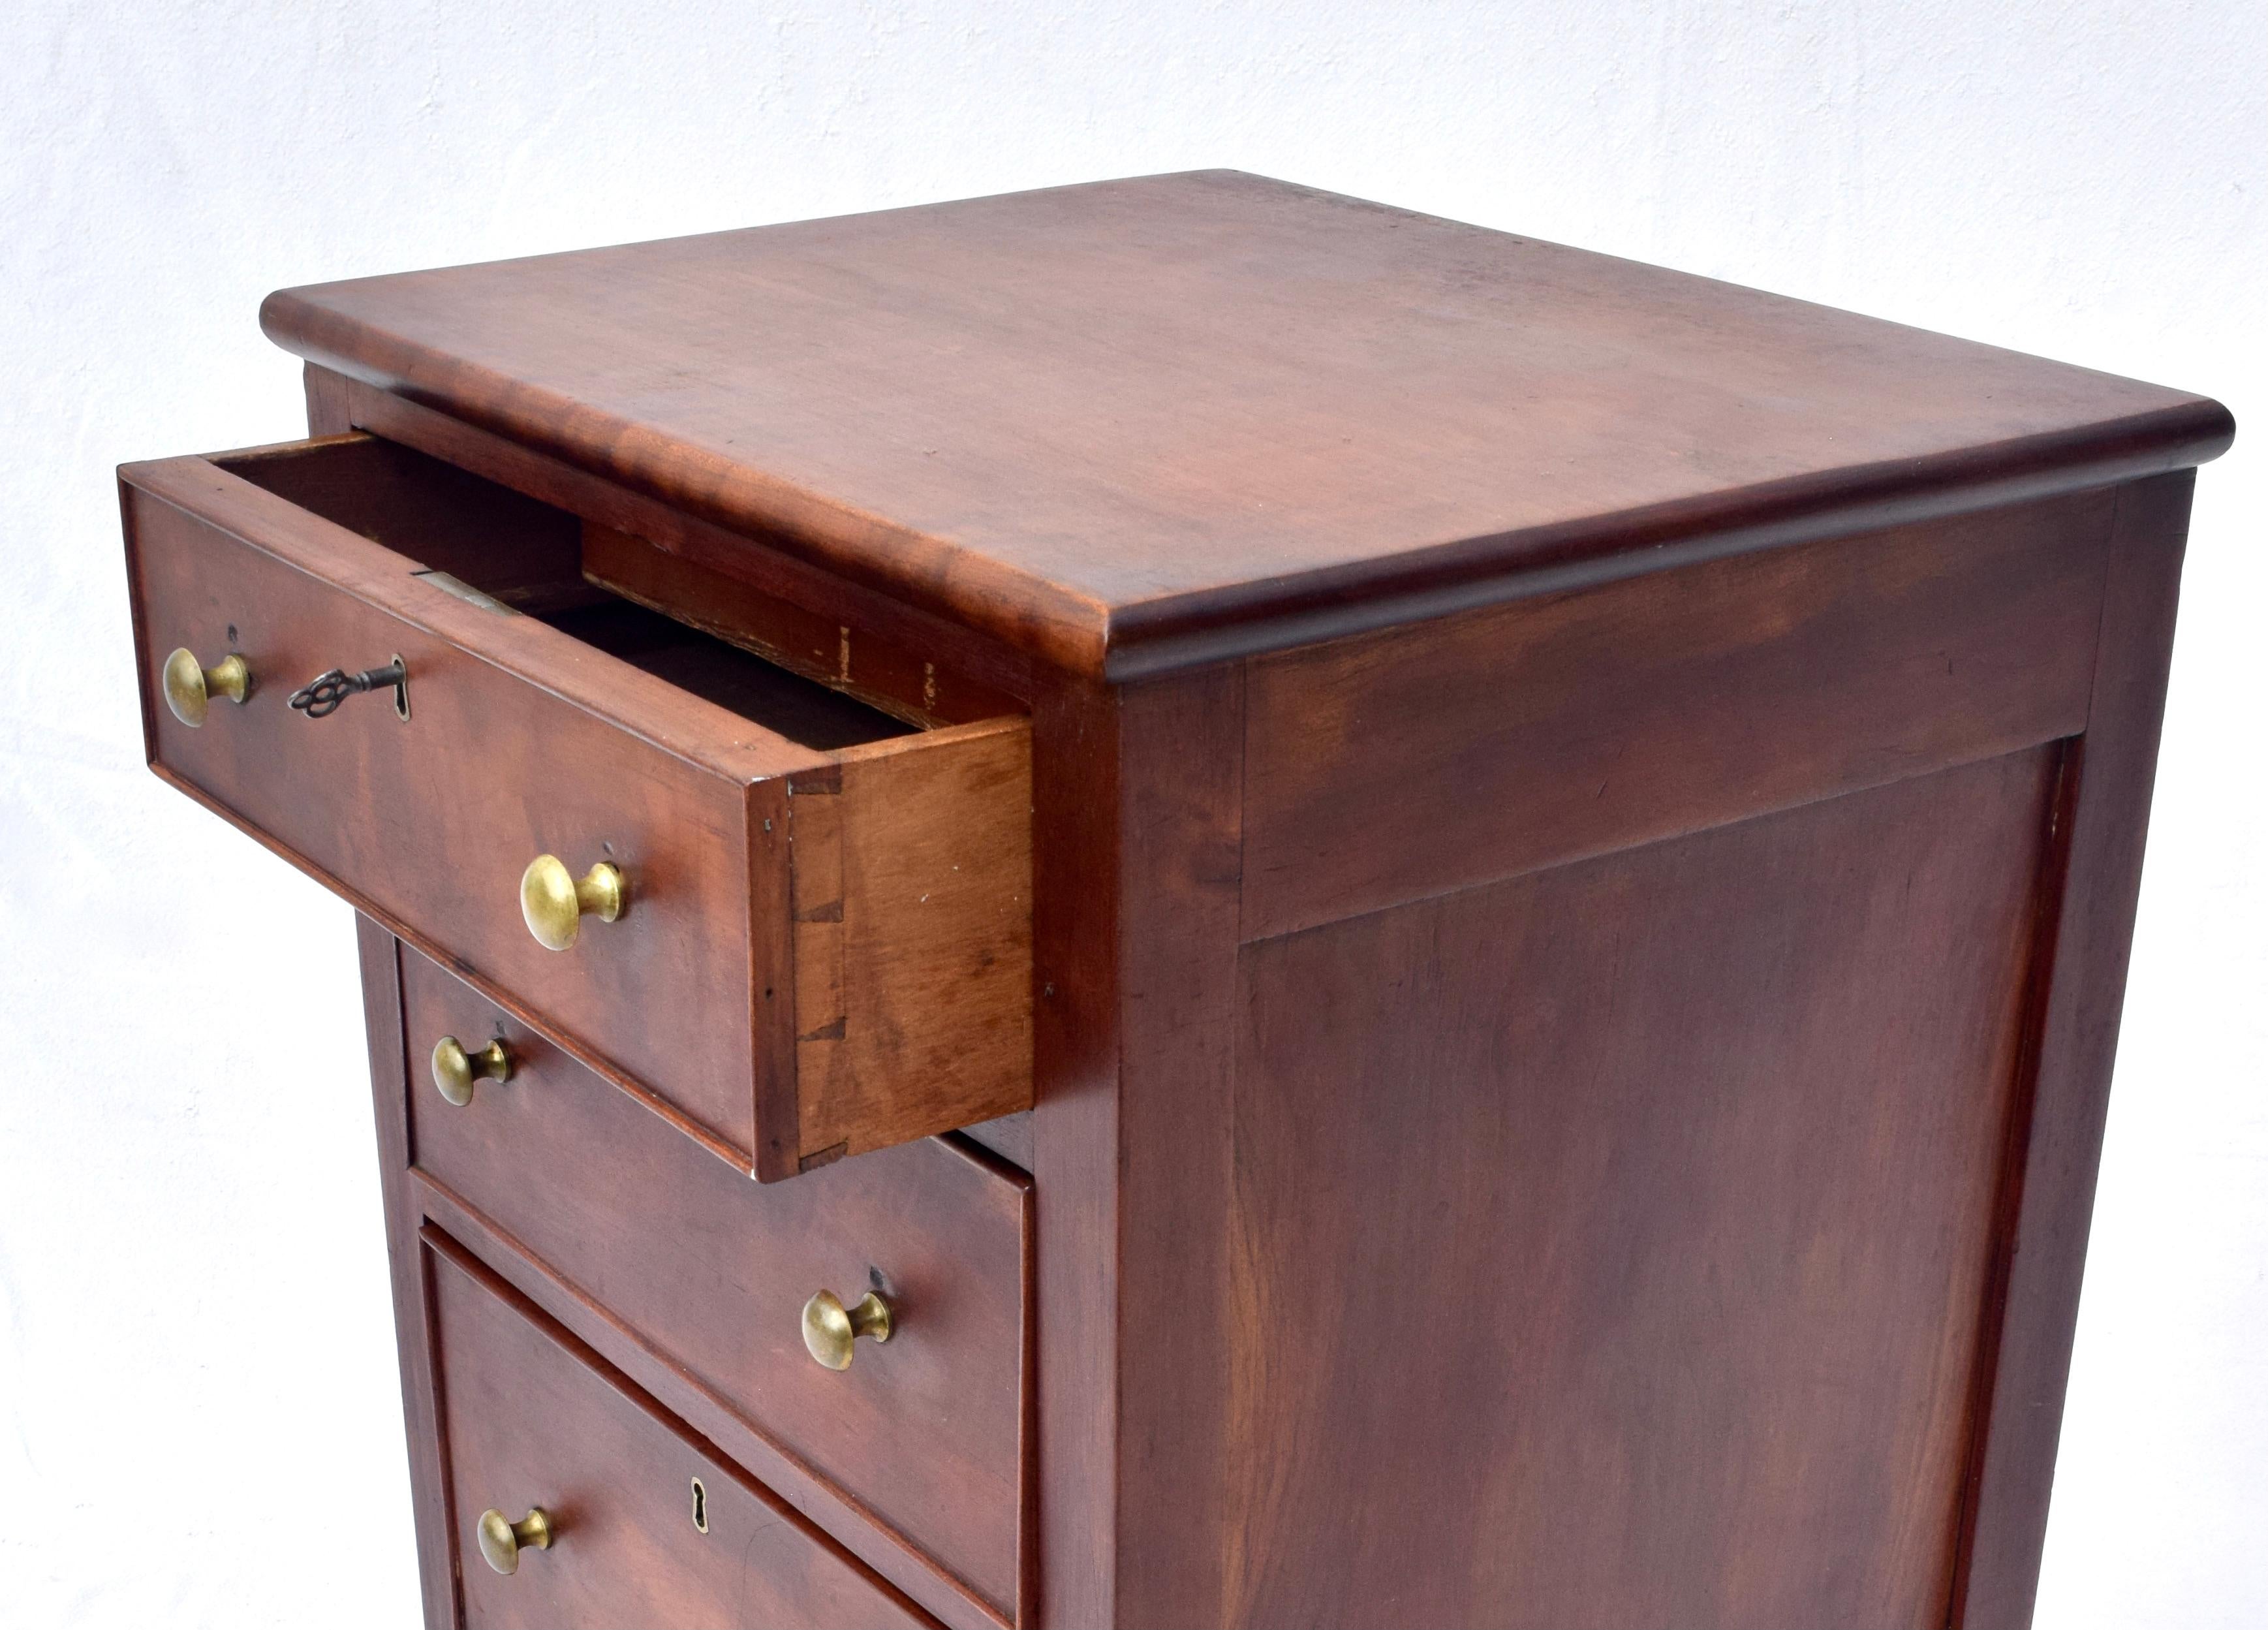 Sheraton Early 19th C. Federal Period Mahogany Chest of Drawers